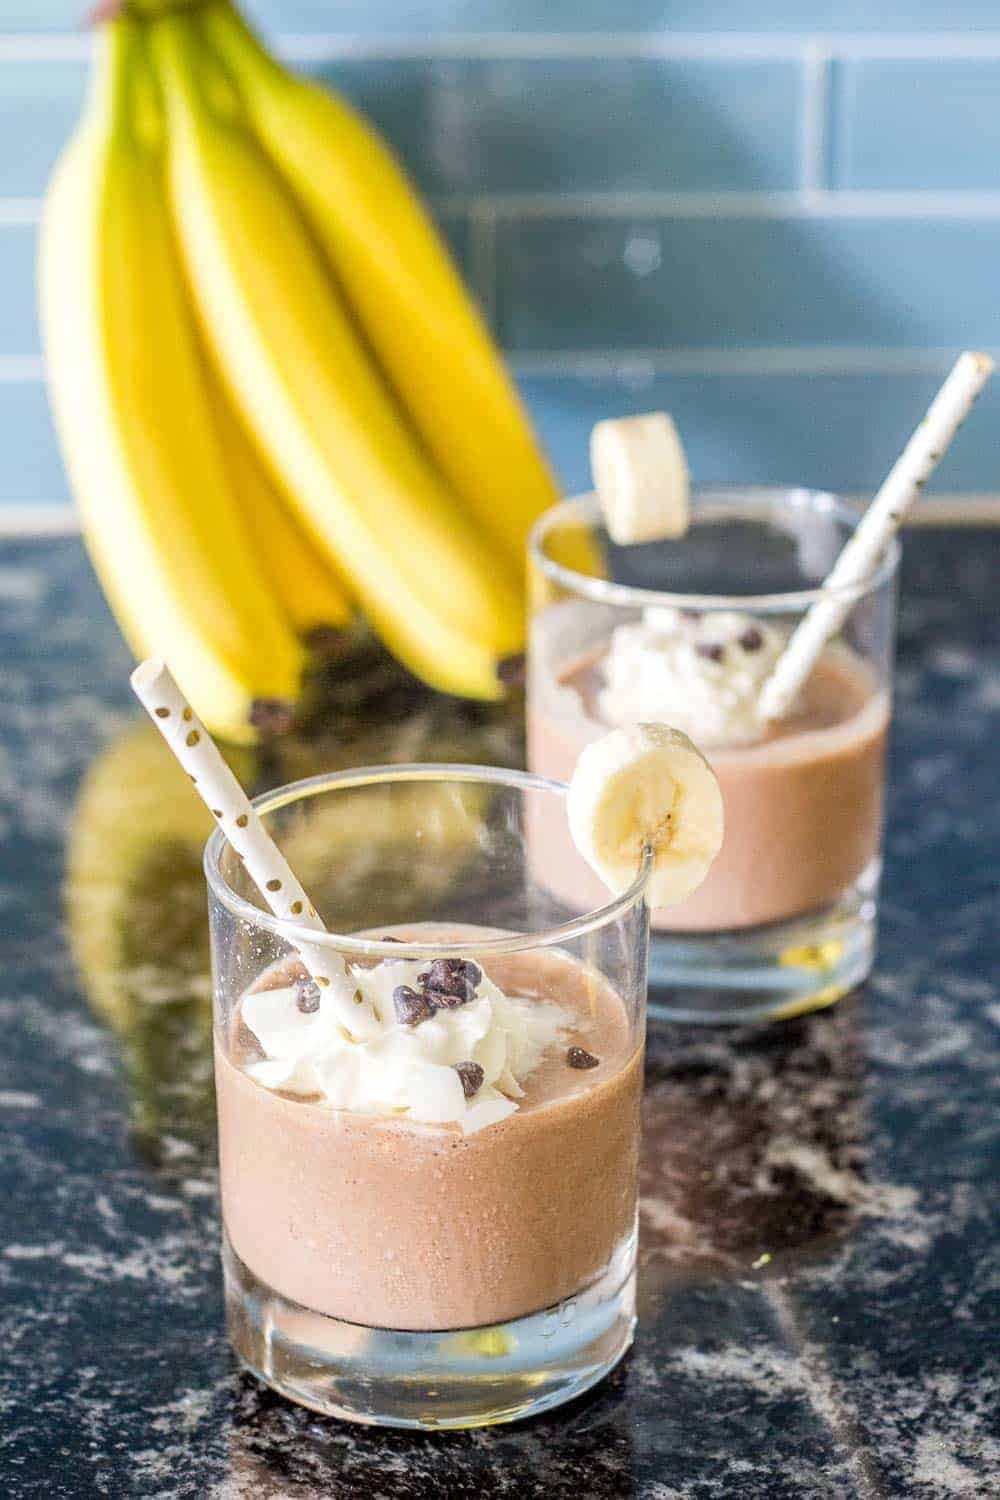 Chunky Monkey Smoothies are a yummy snack the whole family will love!